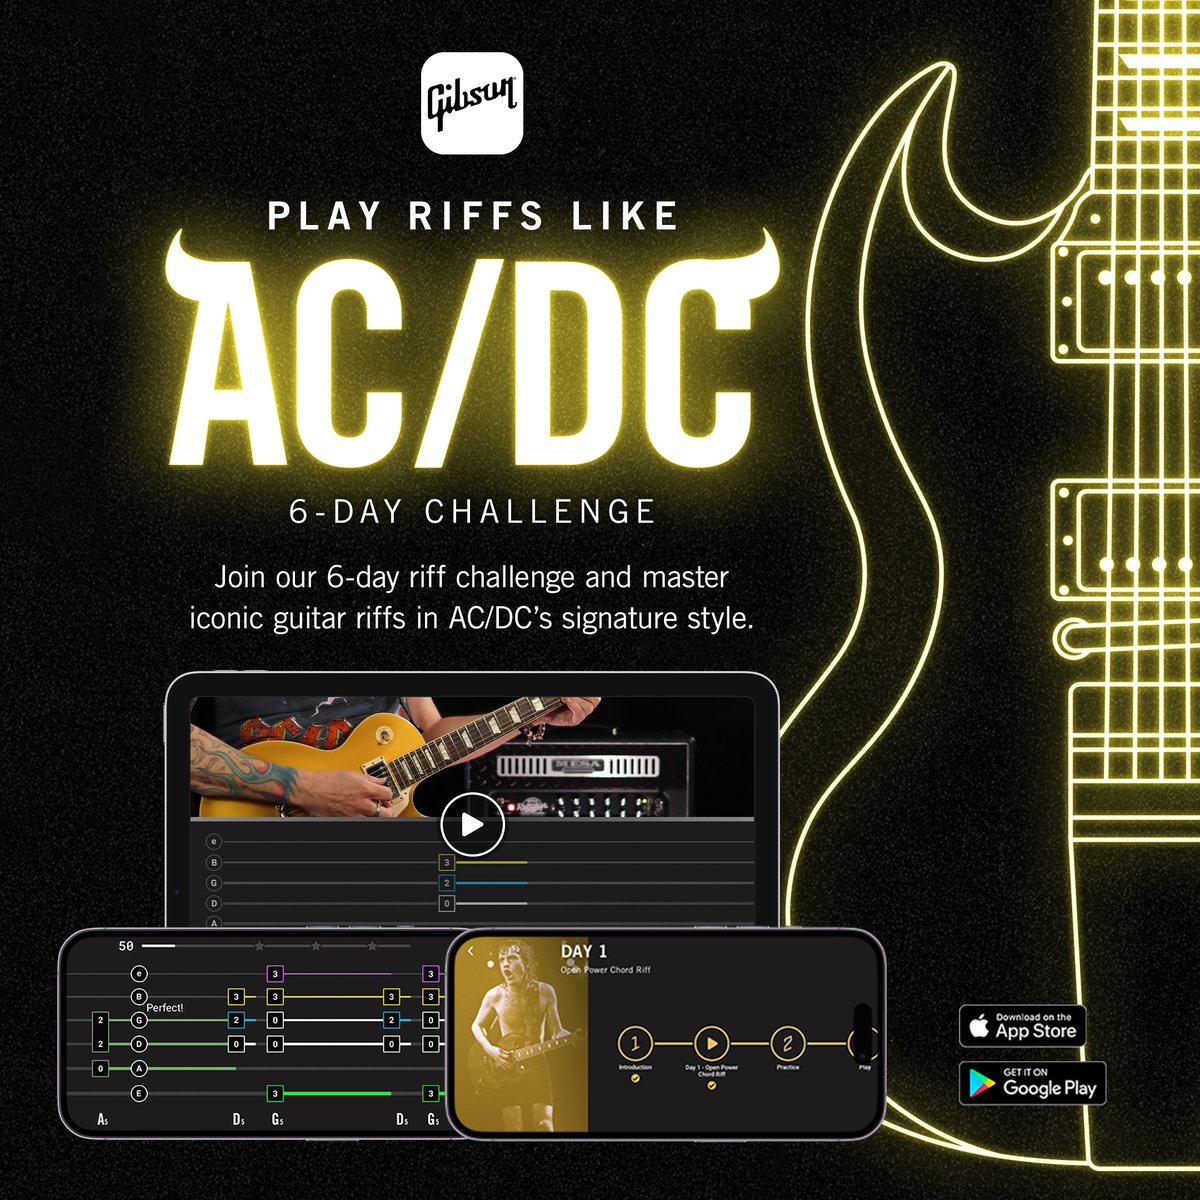 Ready to rock like AC/DC in just 6 days? Join the AC/DC riff challenge and learn how to master loads of guitar riffs in their signature style! Unleash your inner rockstar today, exclusively in the Gibson App. LET THERE BE ROCK: ow.ly/Itci50RetWA